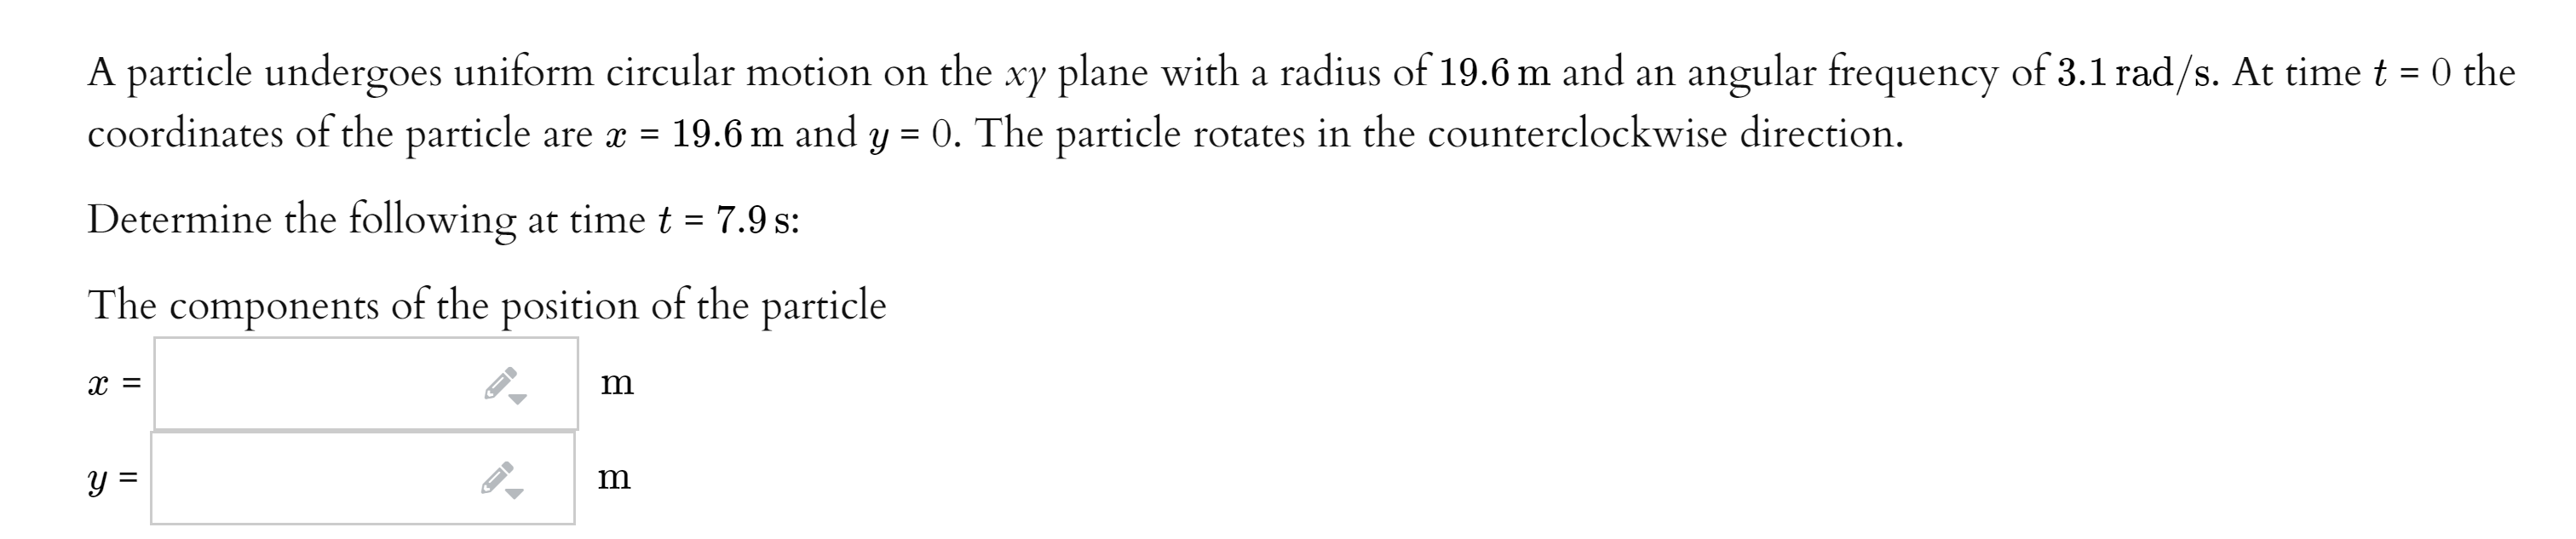 A particle undergoes uniform circular motion on the xy plane with a radius of 19.6 m and an angular frequency of 3.1 rad/s. At time t = 0 the
coordinates of the particle are x = 19.6 m and y = 0. The particle rotates in the counterclockwise direction.
%3D
Determine the following at time t = 7.9 s:
The
components
of the position of the particle
m
Y =
m
II
